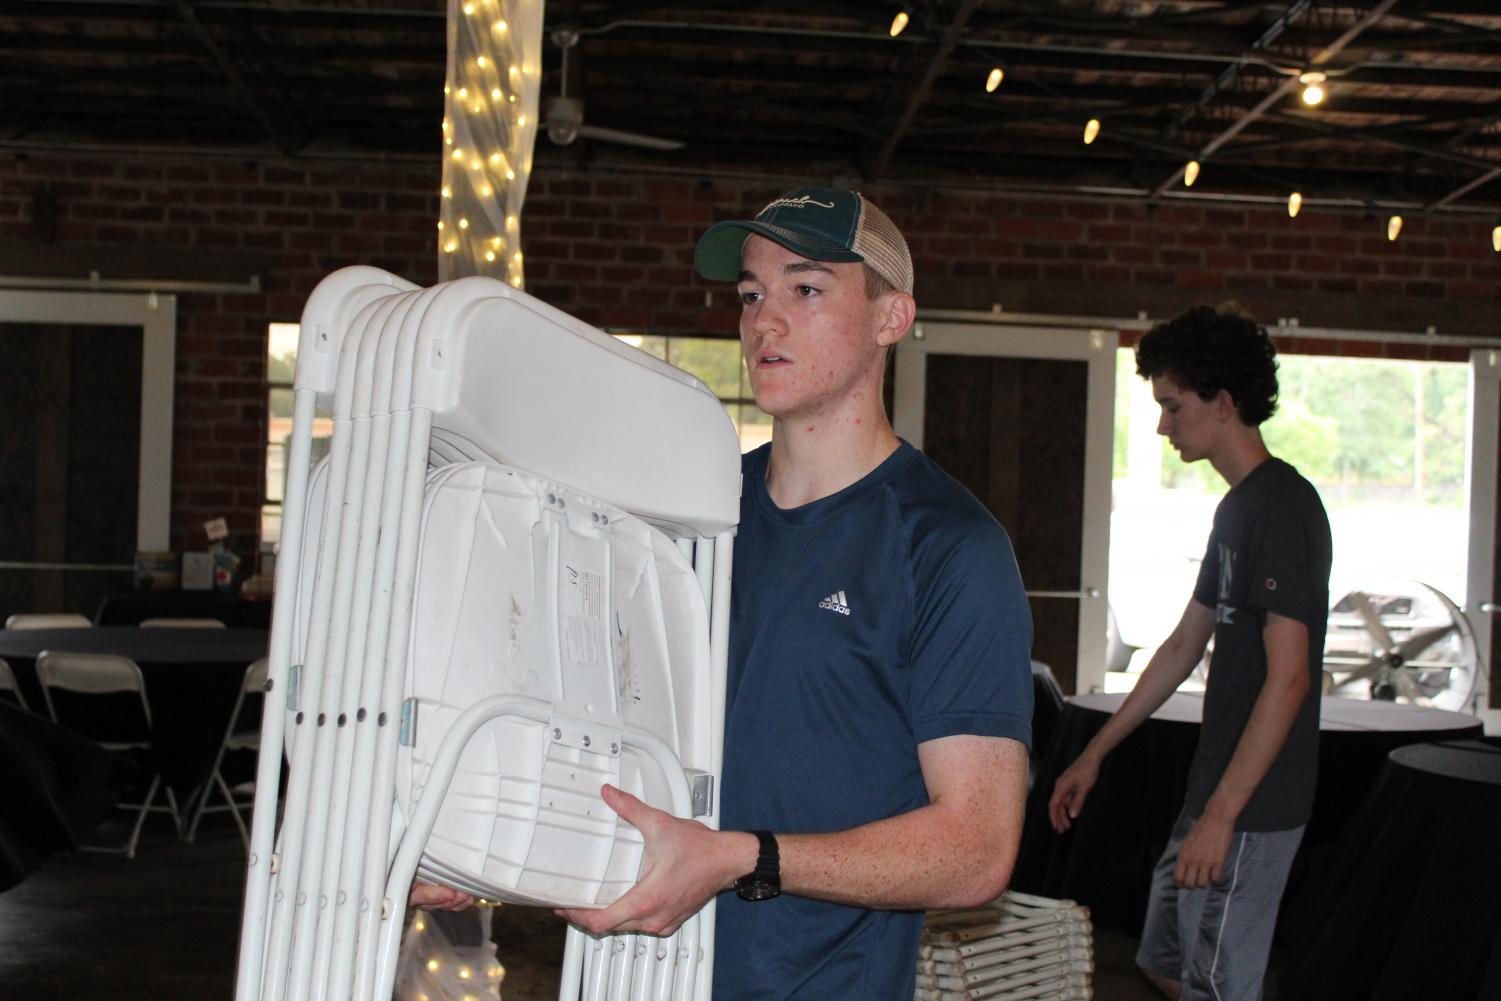 Junior Travis Reeves helps at the gala. He set up tables and chairs for the event.